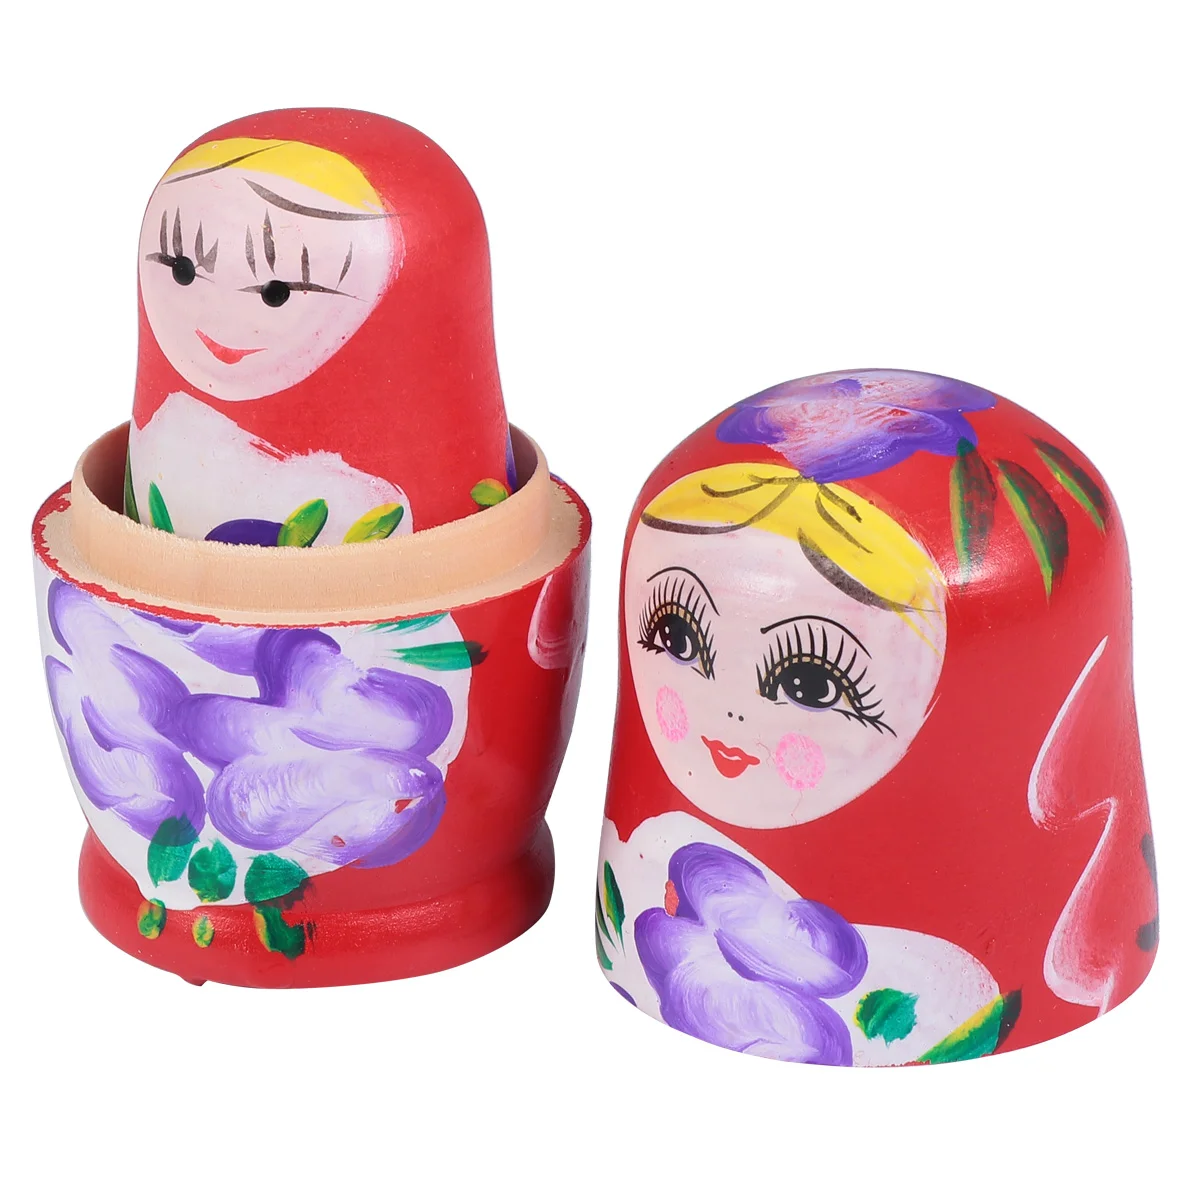 

Russian Nesting Kids Toy Stacking Christmas Wooden Painted Matrioskas Holiday Figures Stocking Filler Handmade Traditional Dead